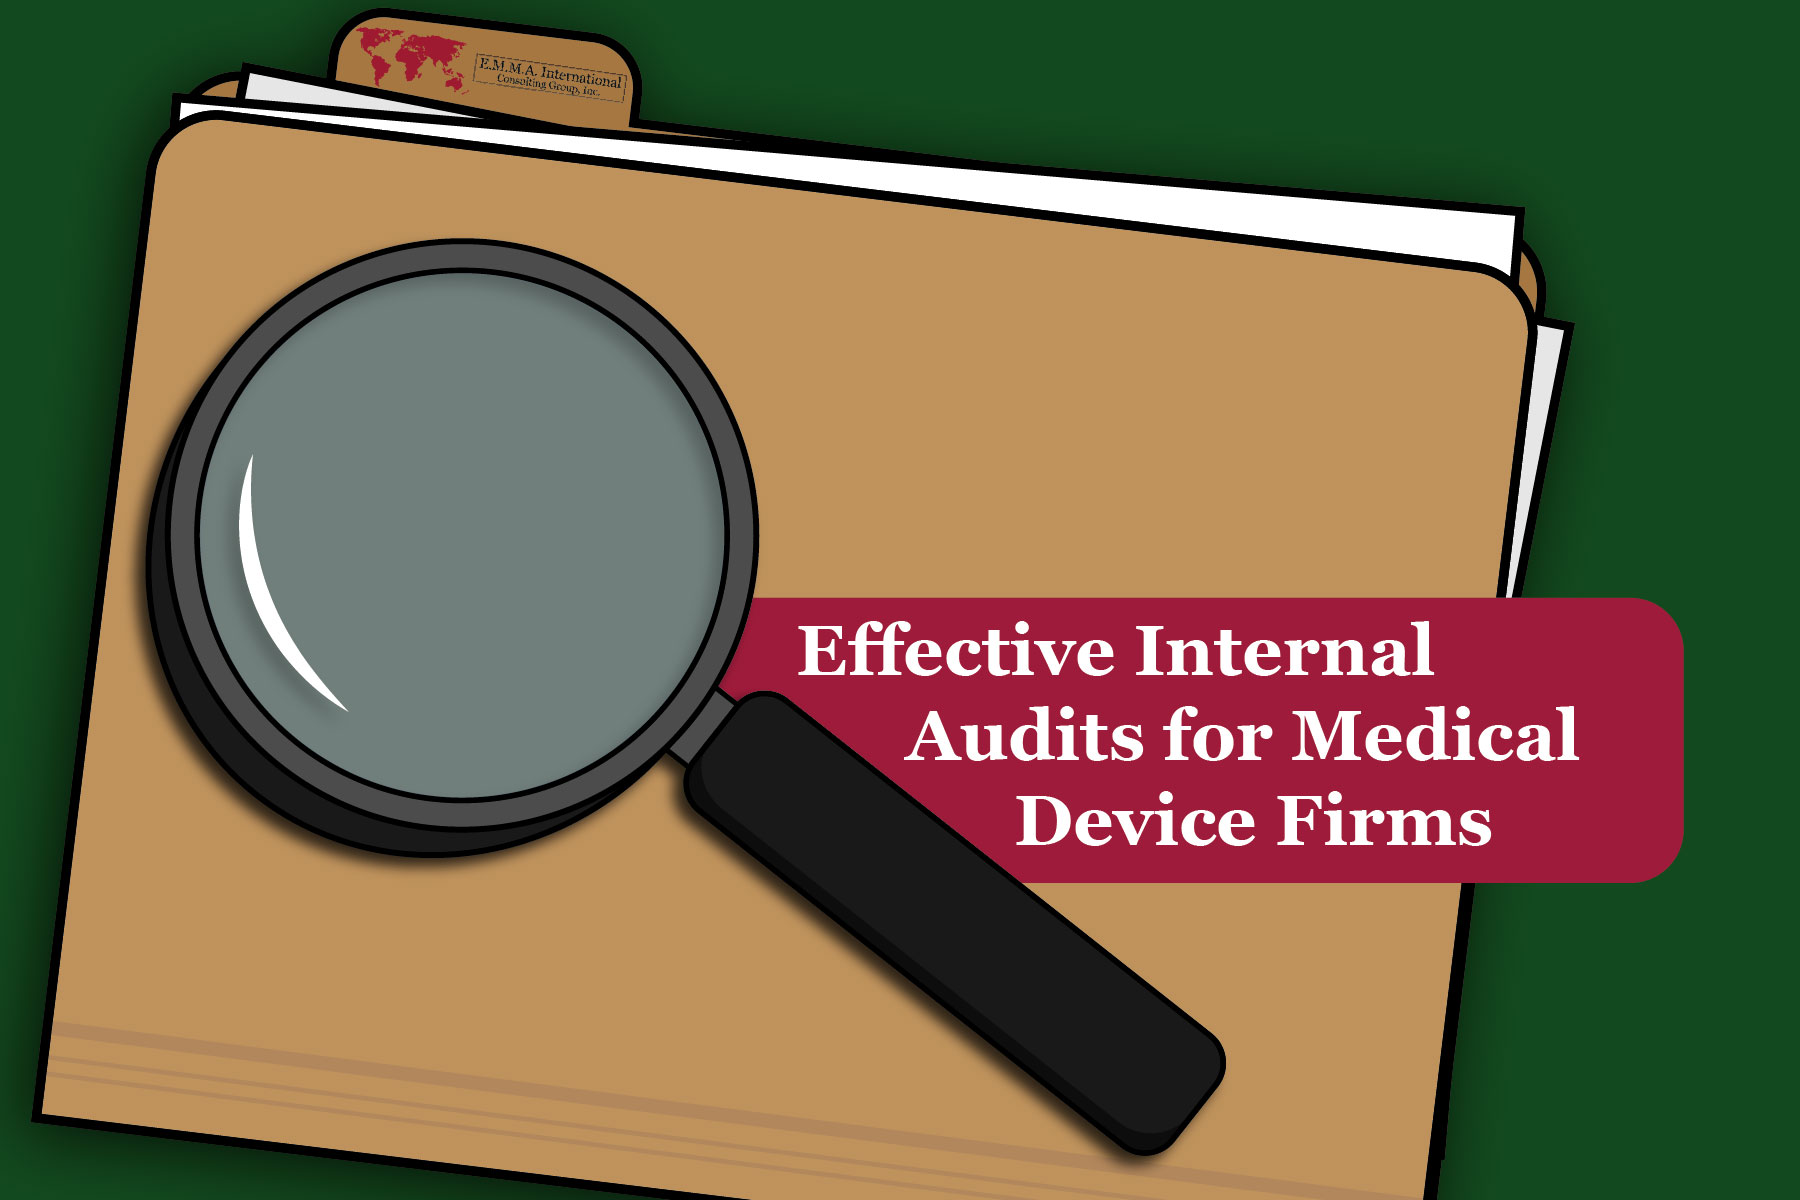 Effective Internal Audits for Medical Device Firms